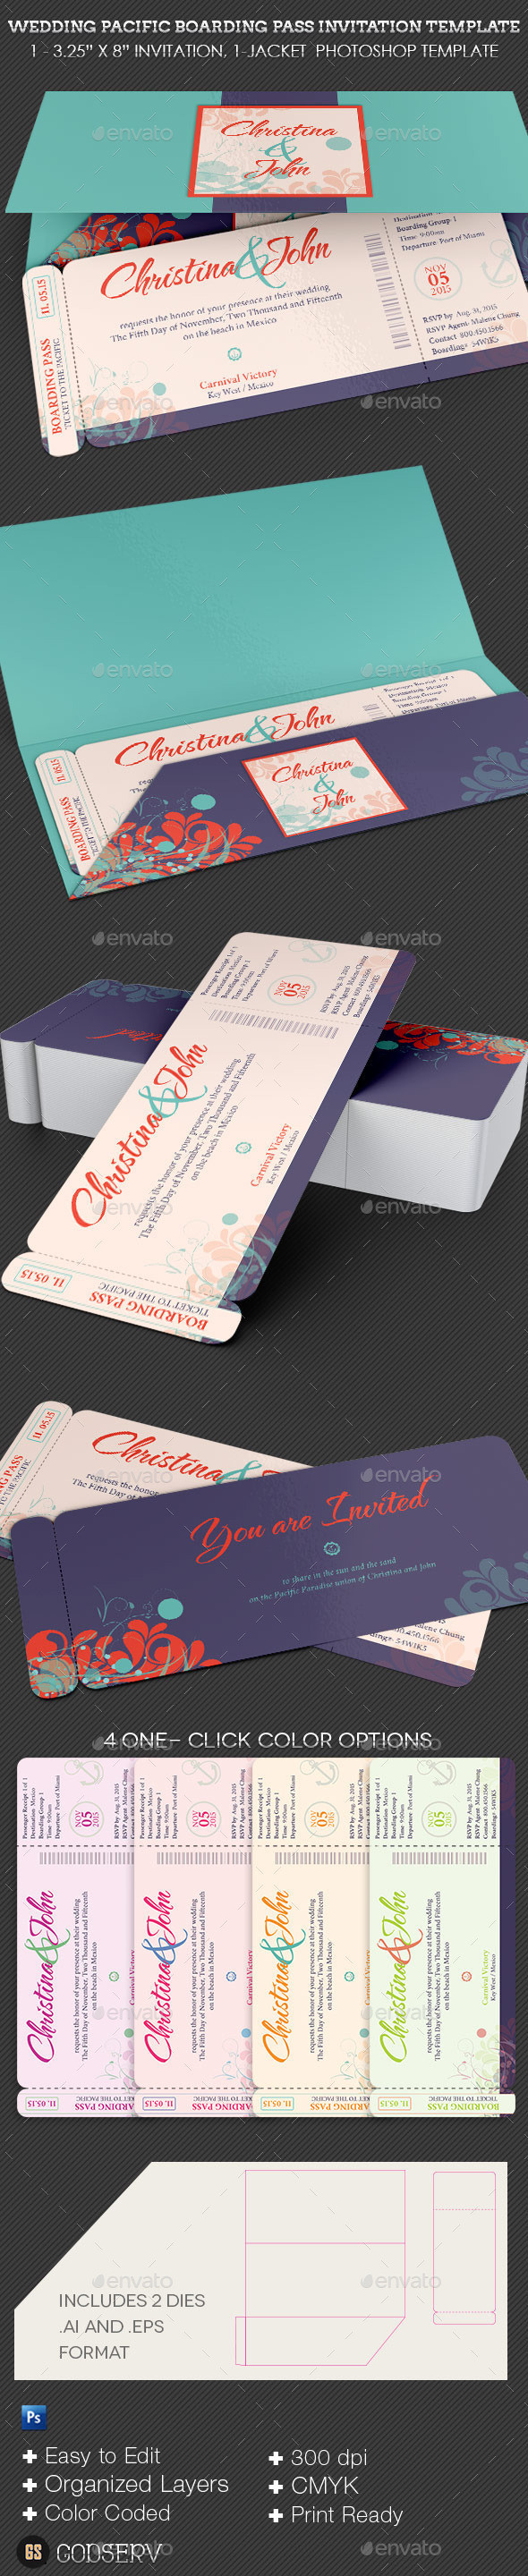 Wedding pacific boarding pass invitation template preview